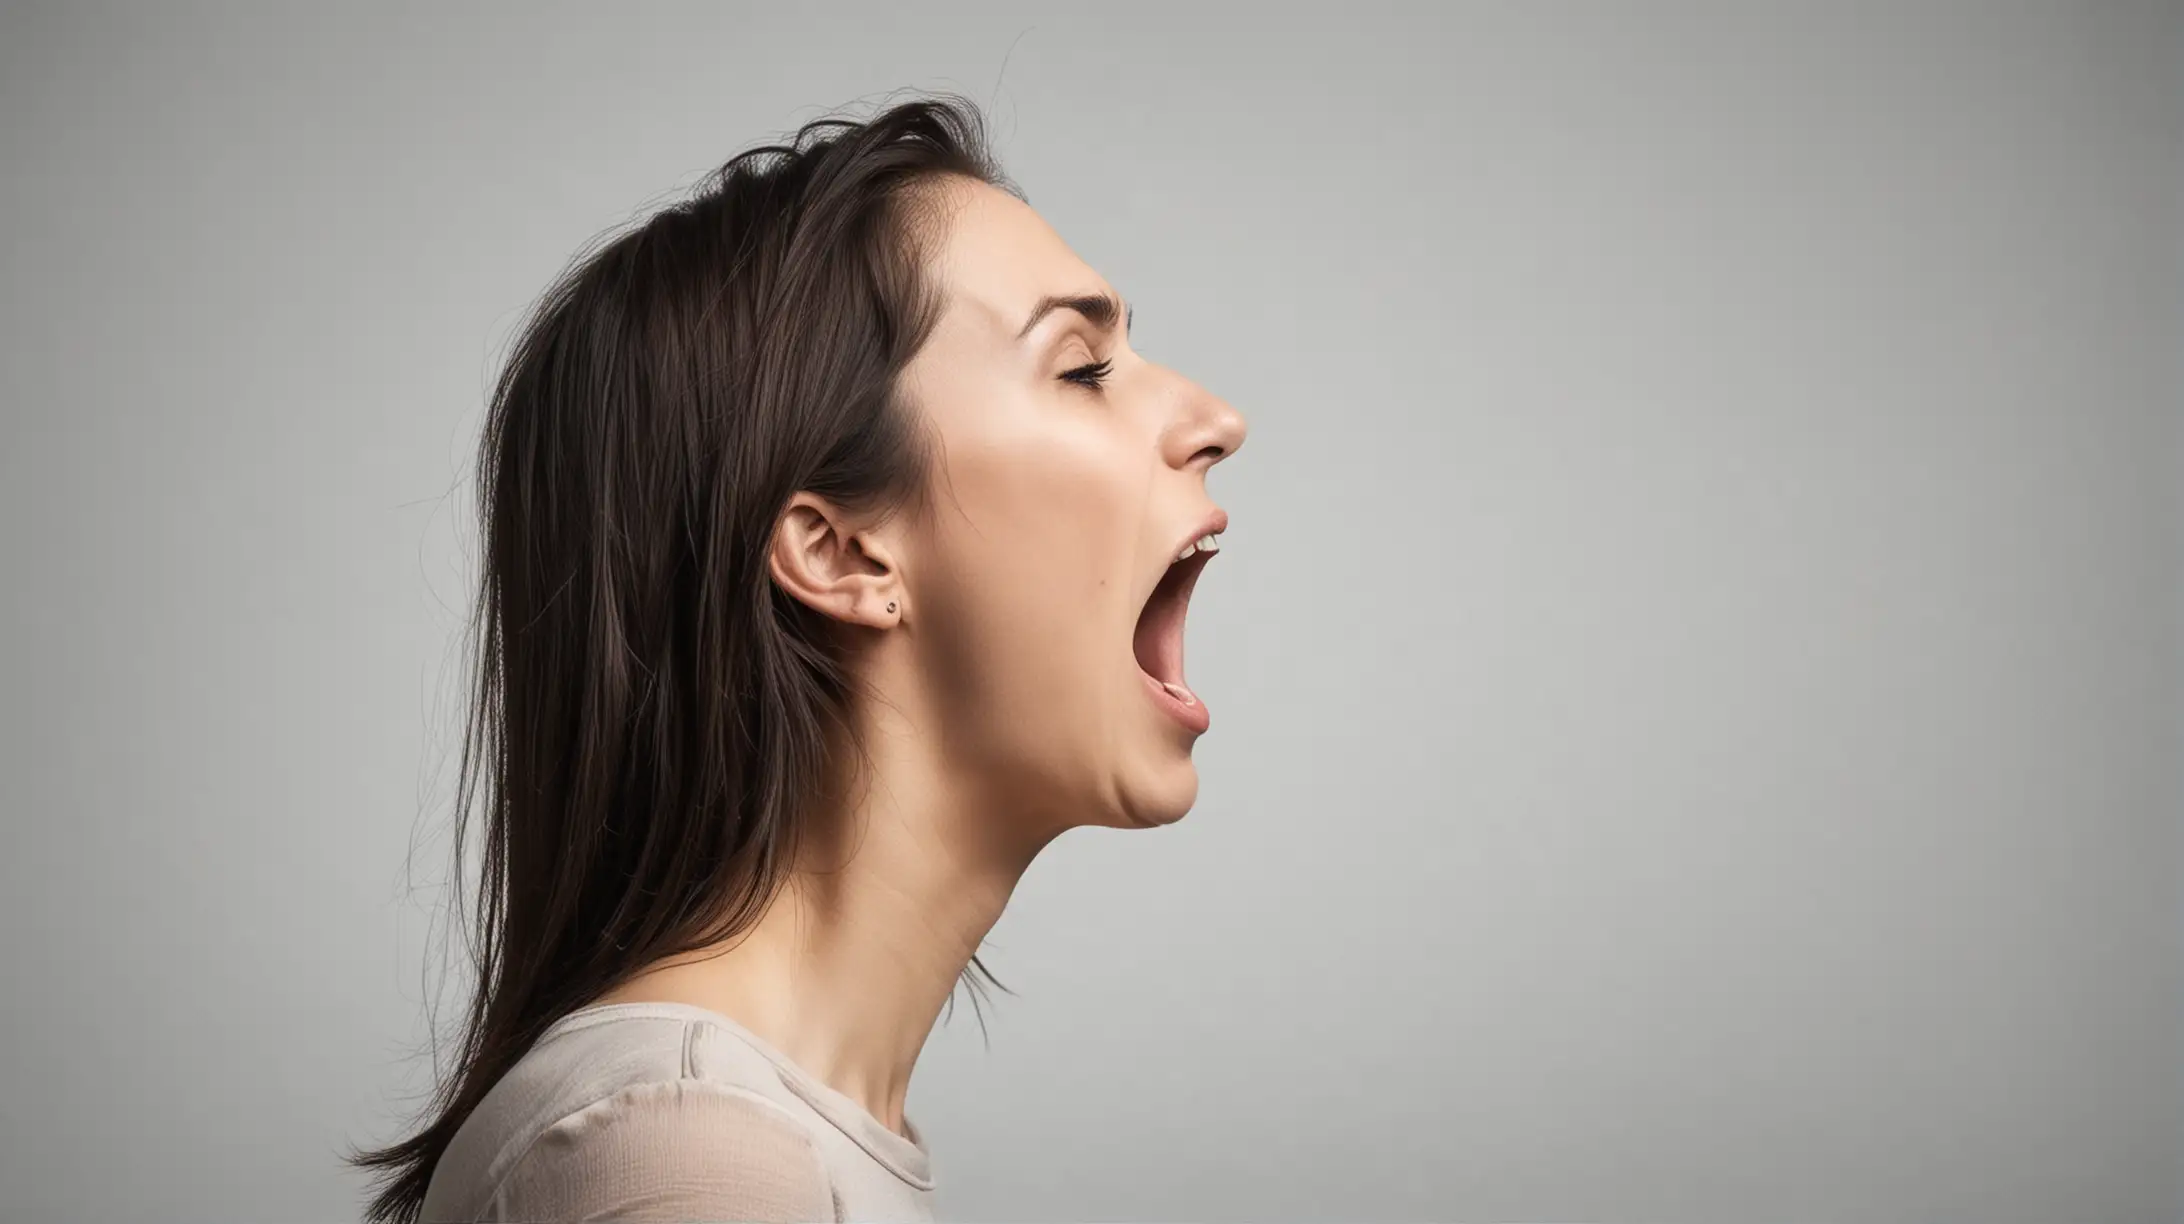 Side profile of a women head and she's screaming, it appears to the middle of the image, the other half of the image is empty